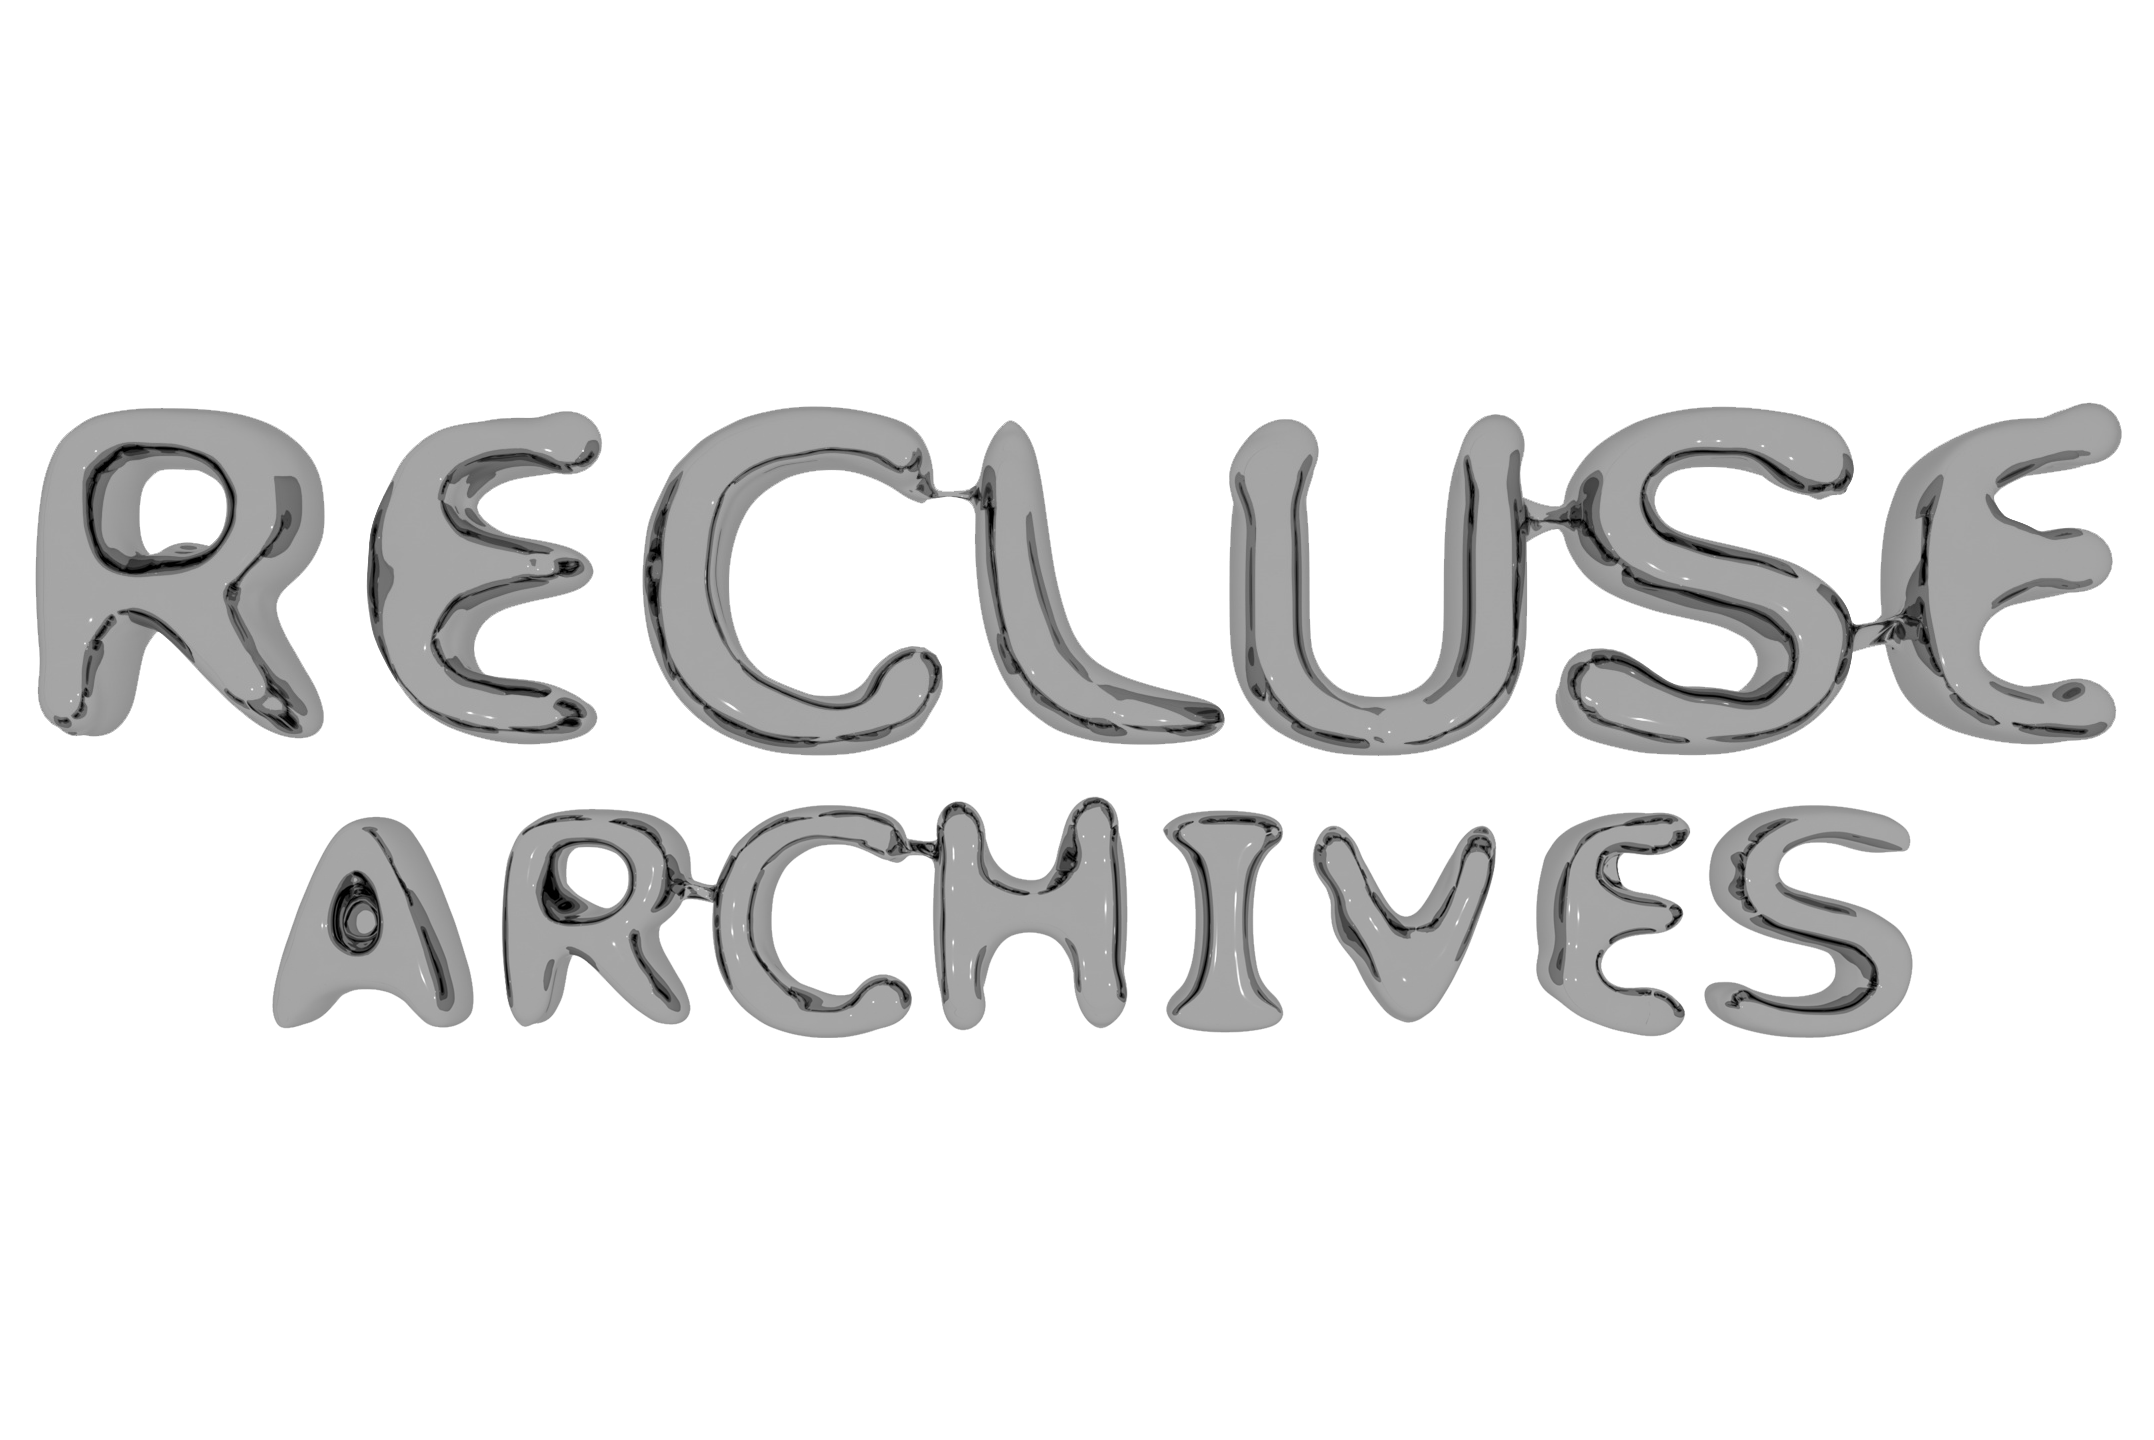 Recluse Archives